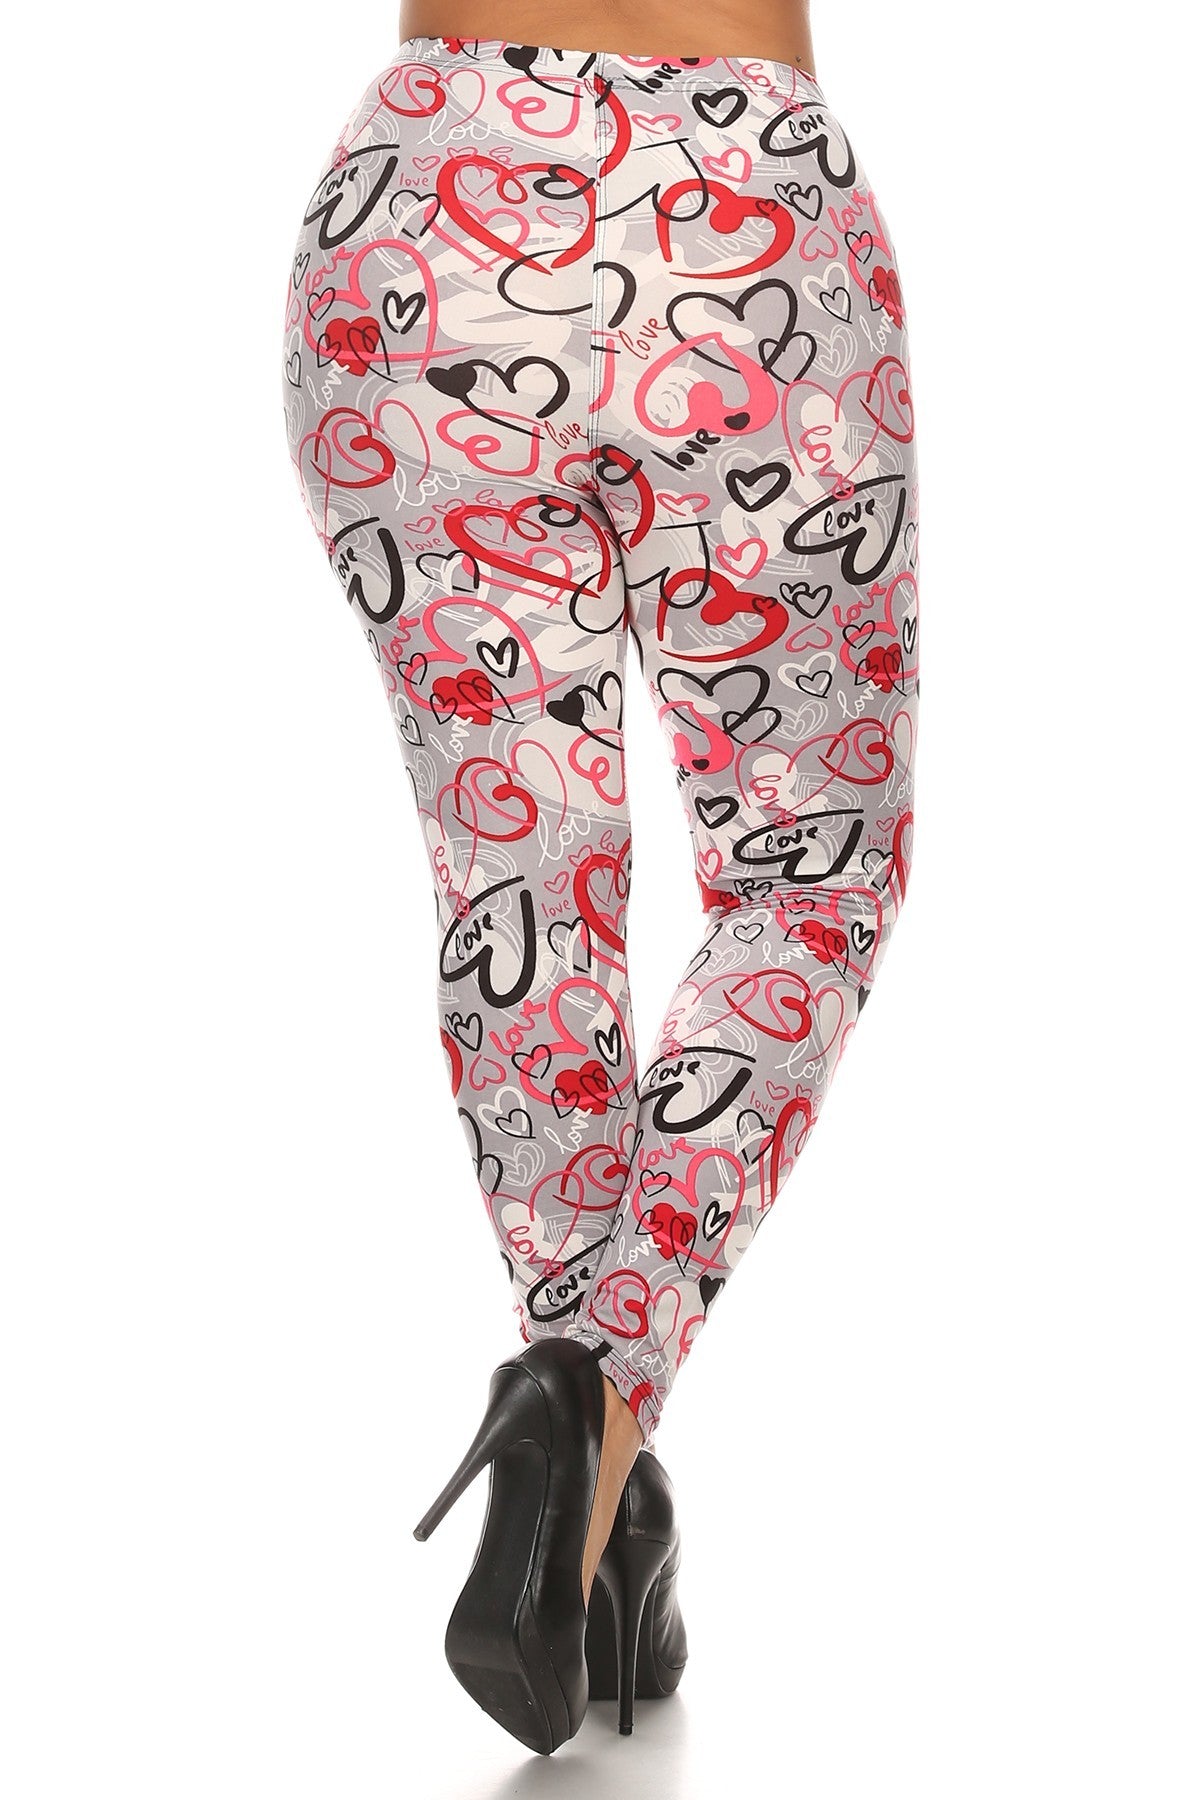 Plus Heart Print, Full Length Leggings In A Slim Fitting Style With A Banded High Waist